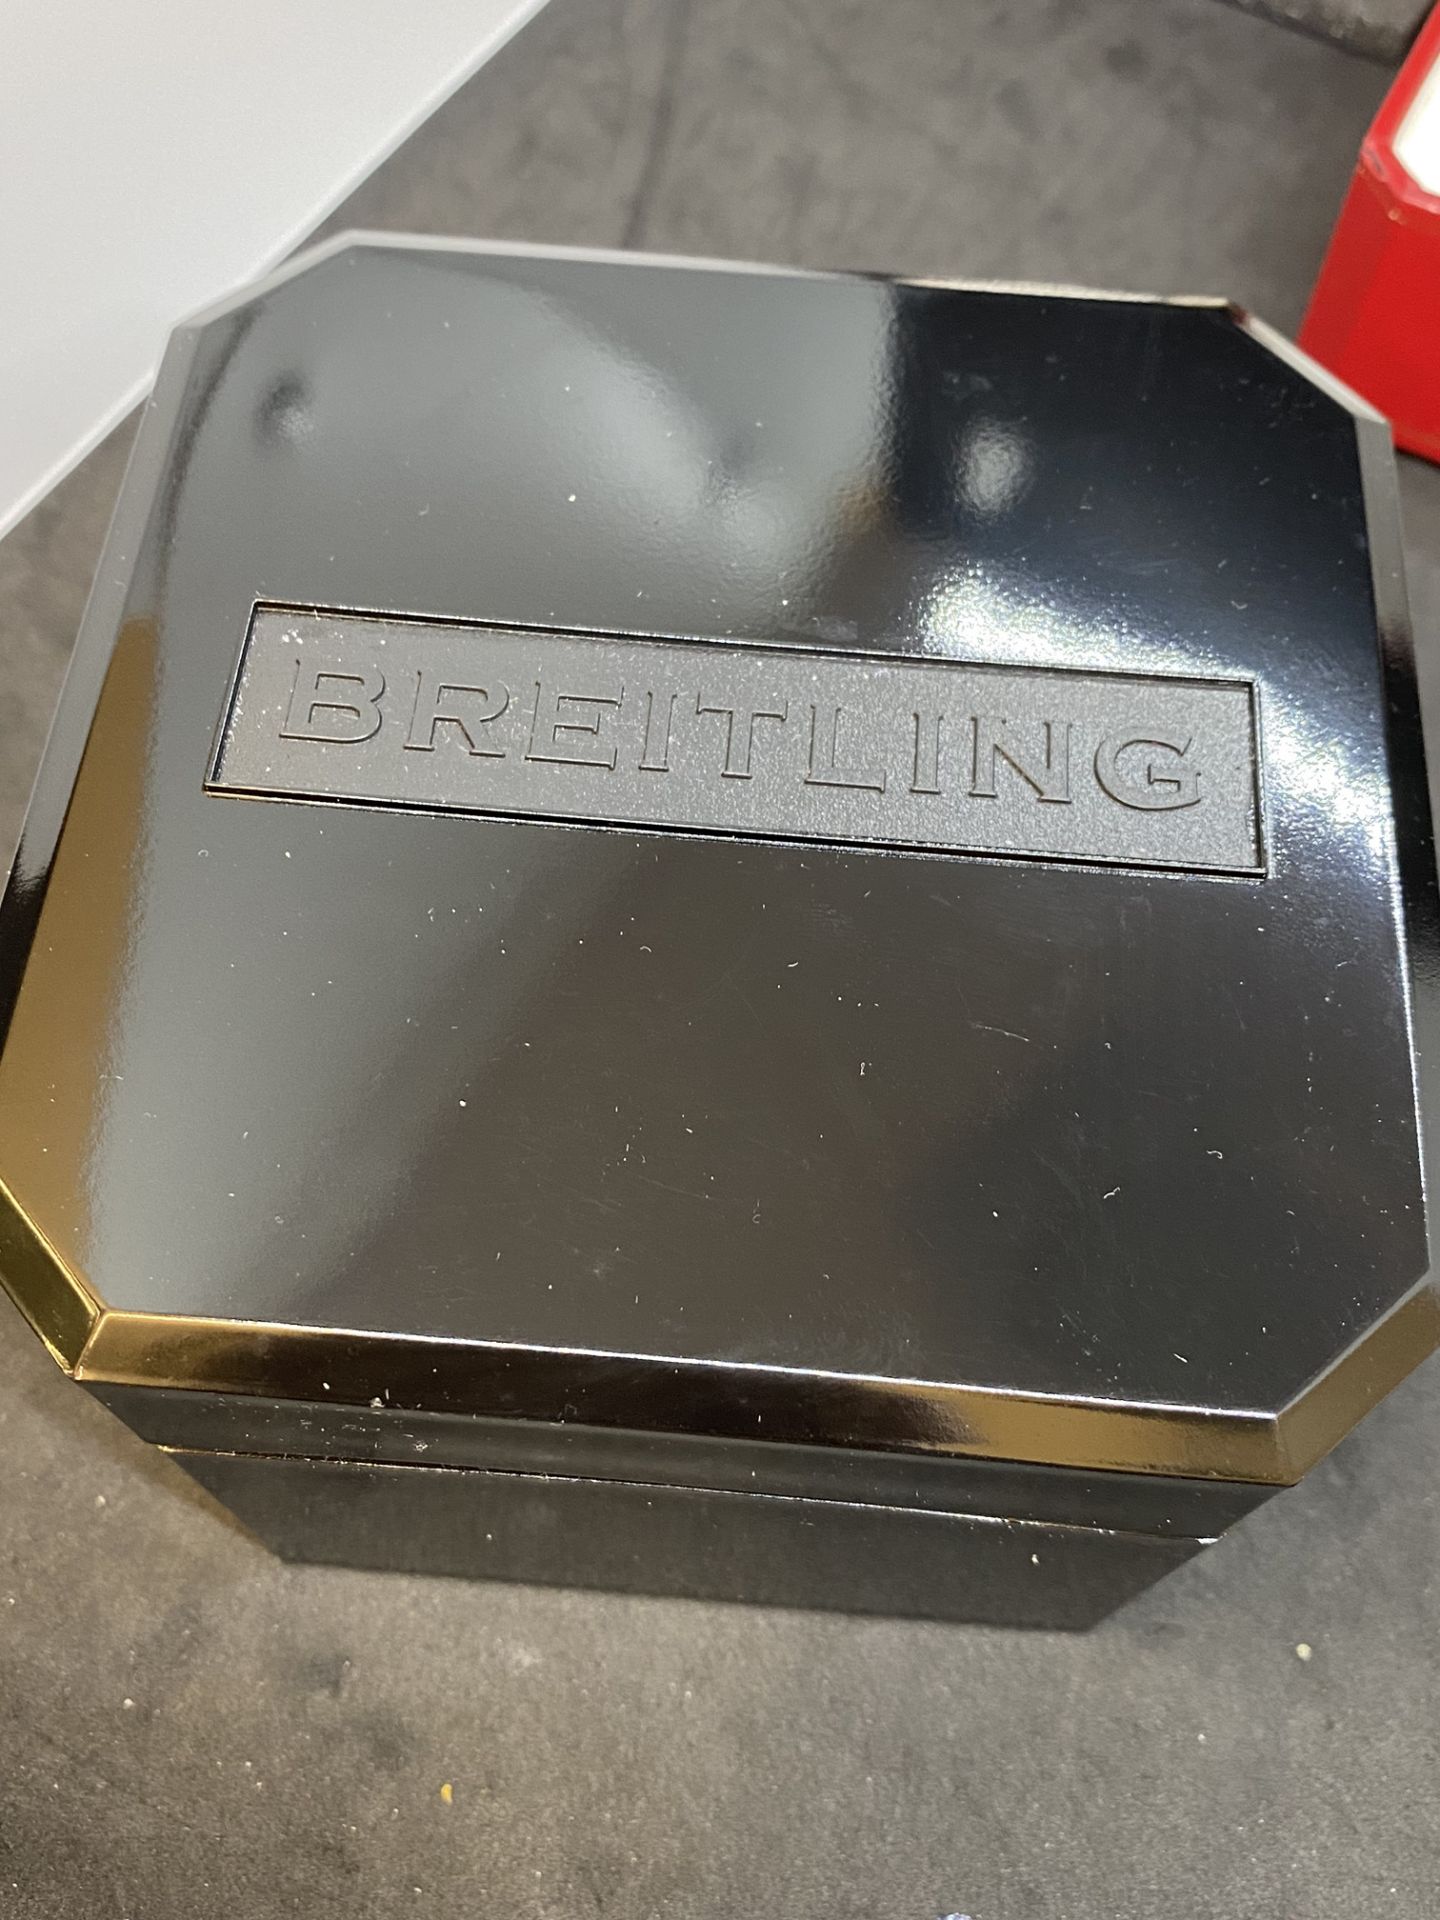 Breitling Navitimer Chronograph Watch with Box - Image 3 of 14